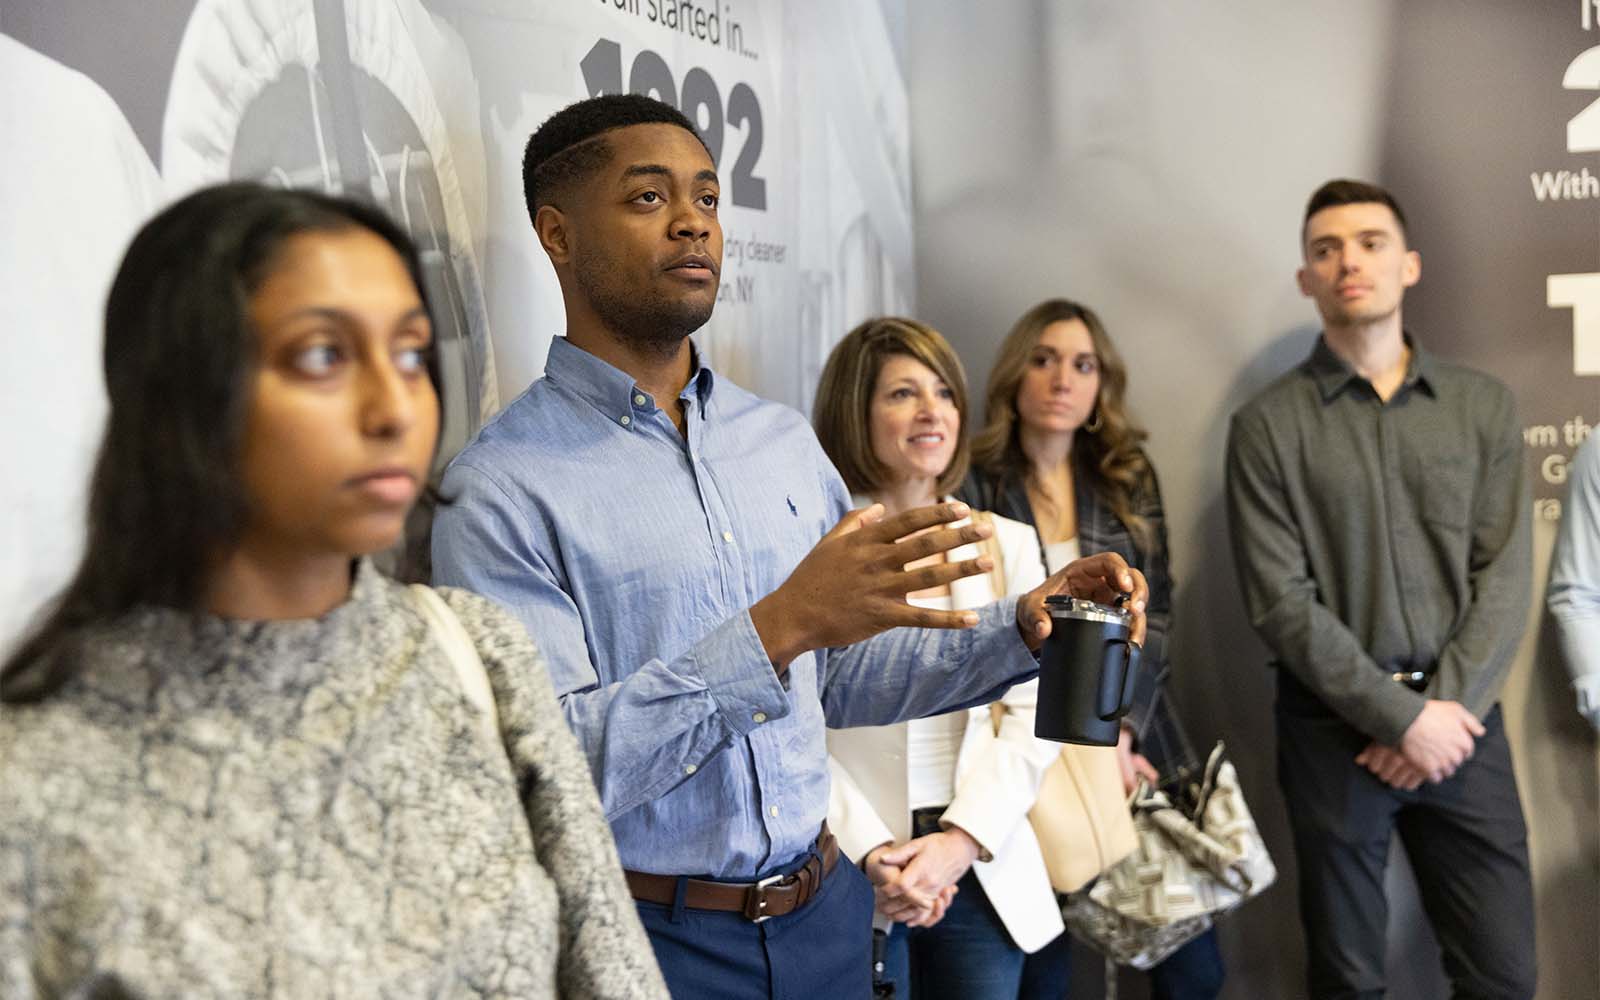 SOM Transformational Leaders Program Coordinator Jerah Reeves, center, poses a question during an April 2022 visit to Cleaners Supply in Conklin, N.Y.